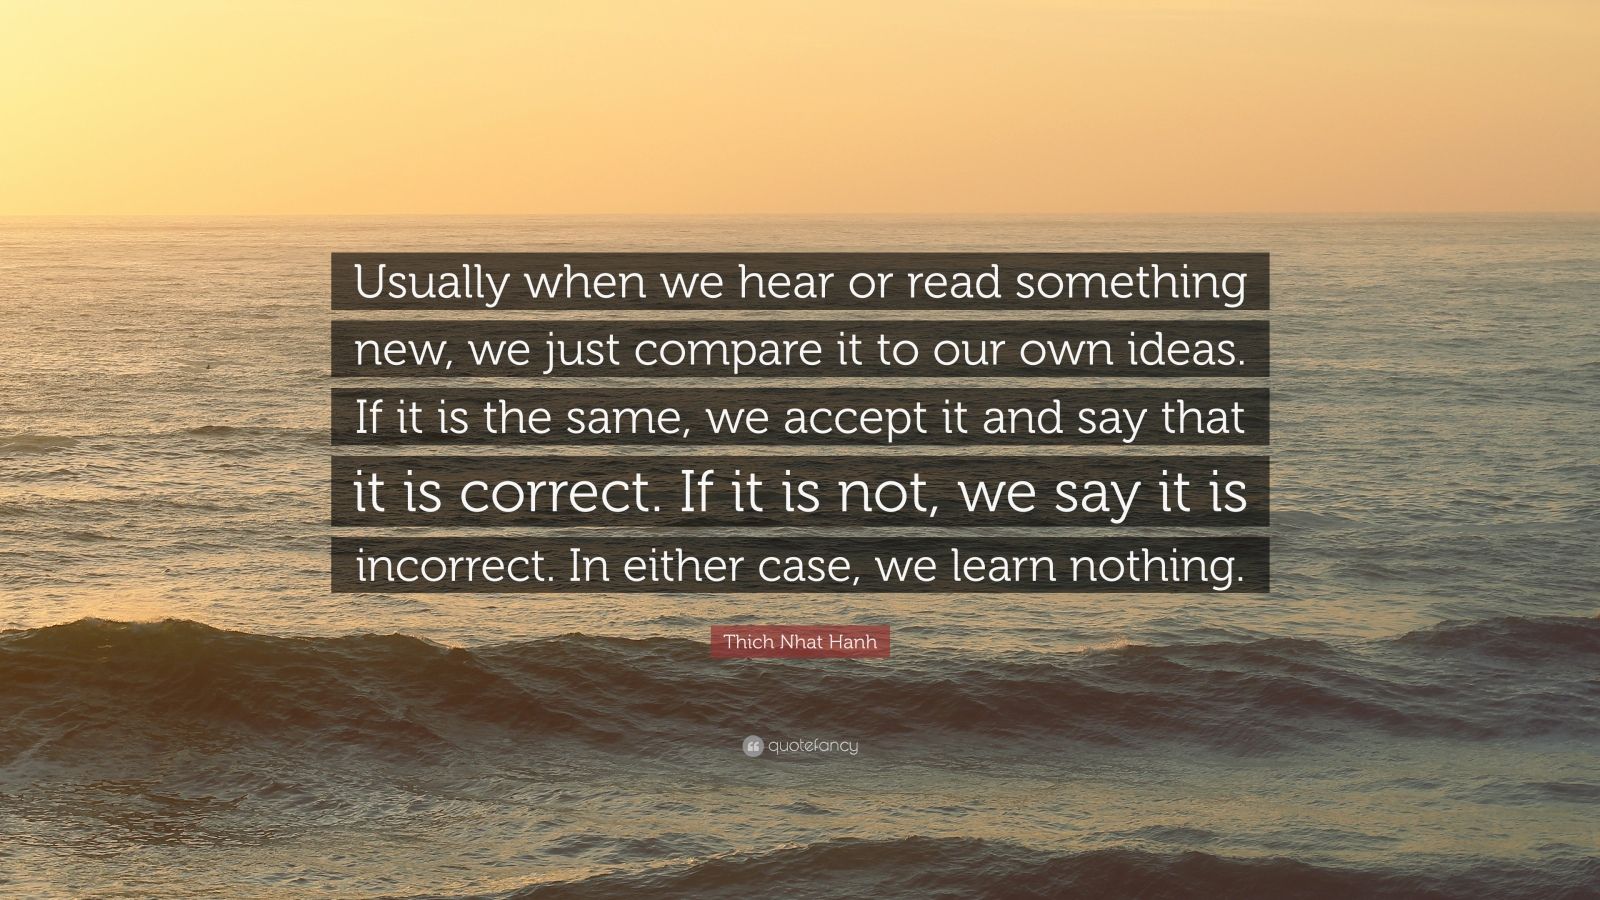 1846110 Thich Nhat Hanh Quote Usually when we hear or read something new